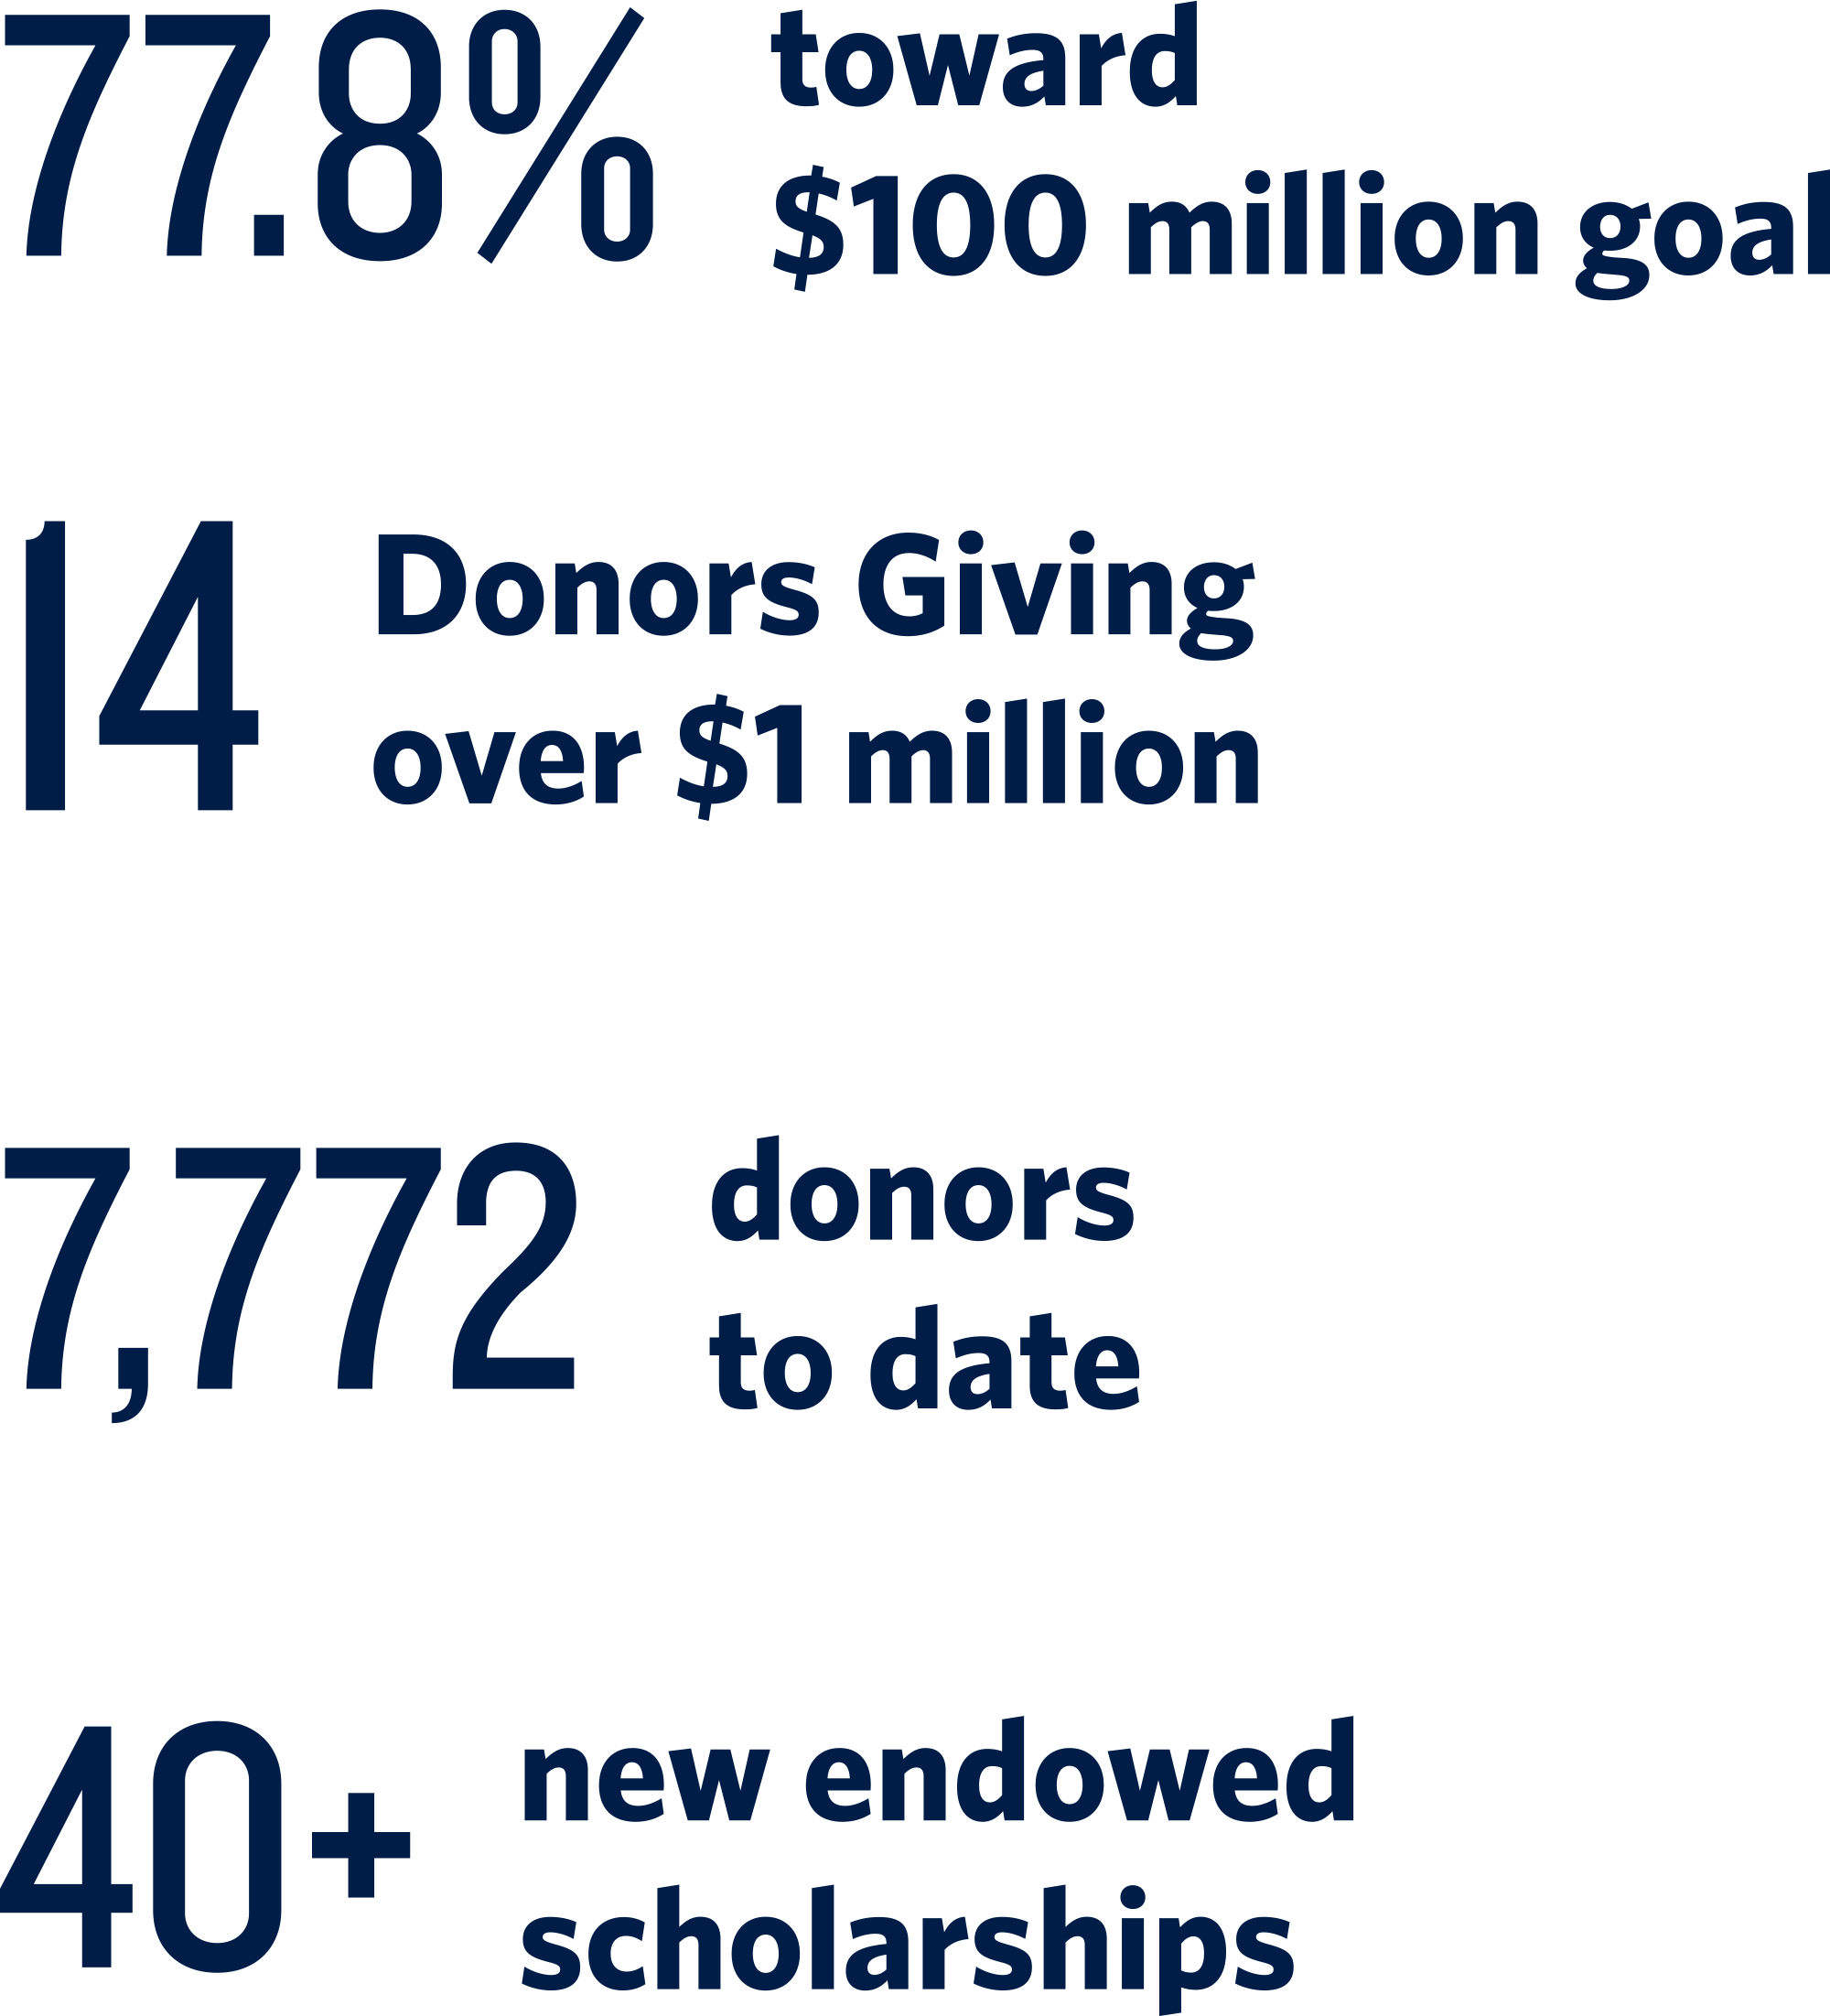 7,772 donors to date and 40+ new endowed scholarships